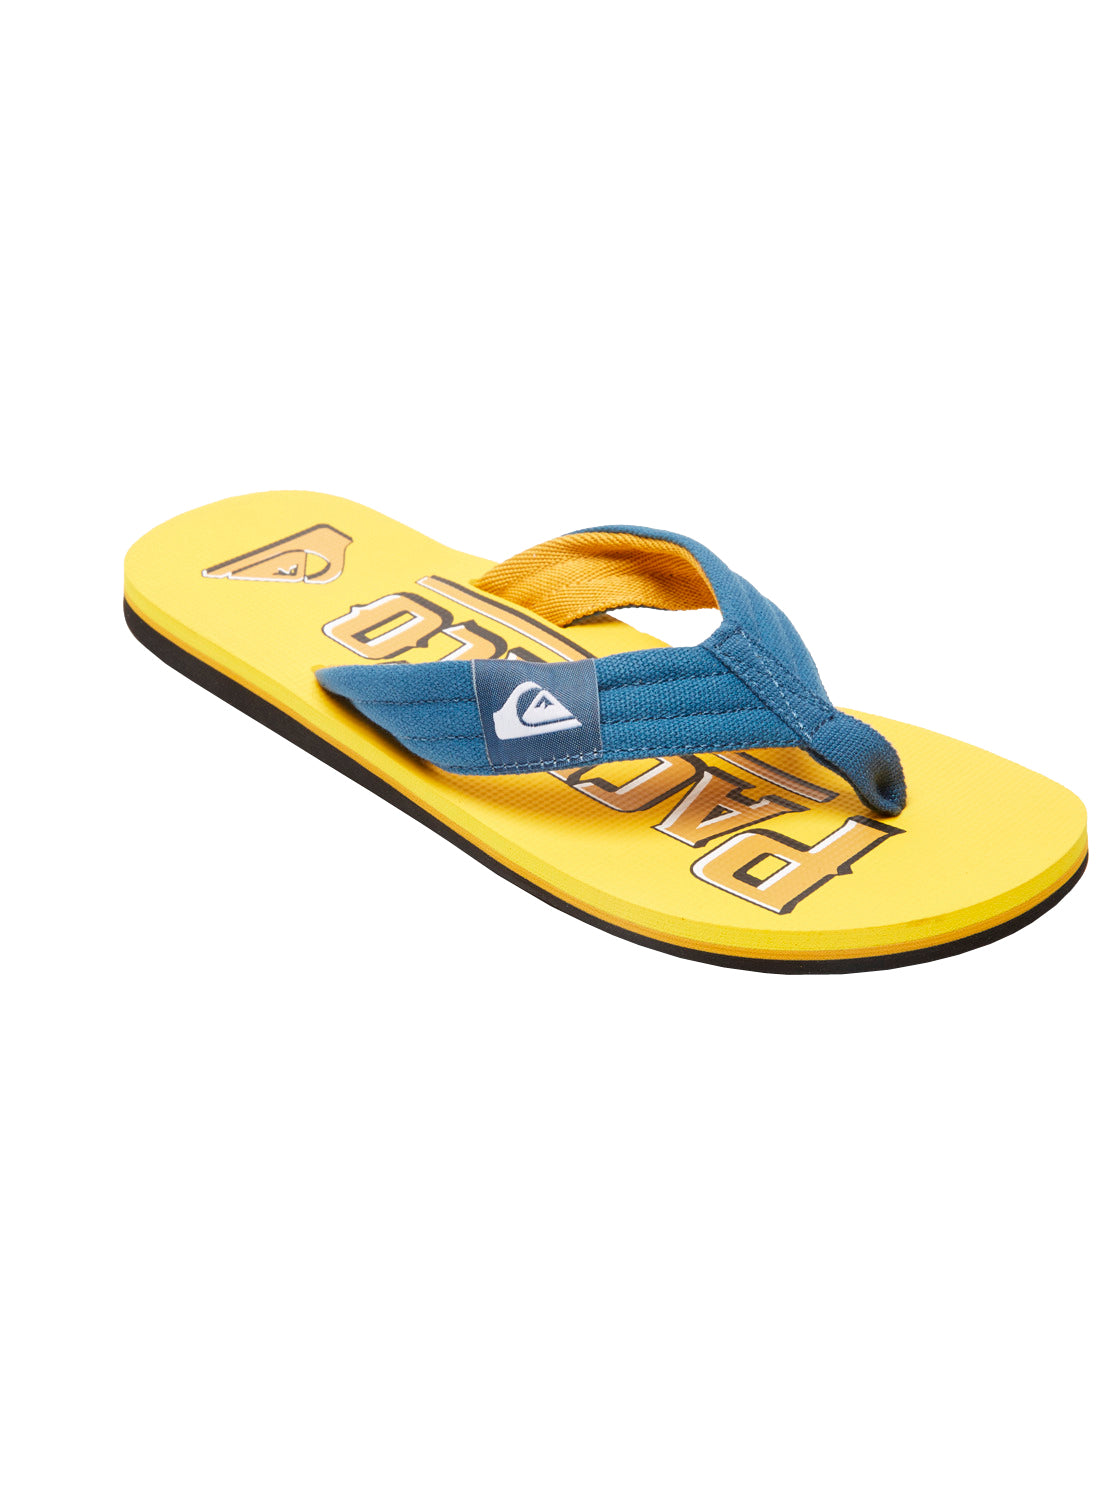 Quiksilver X Pacifico Layback Sandal XKKY 13